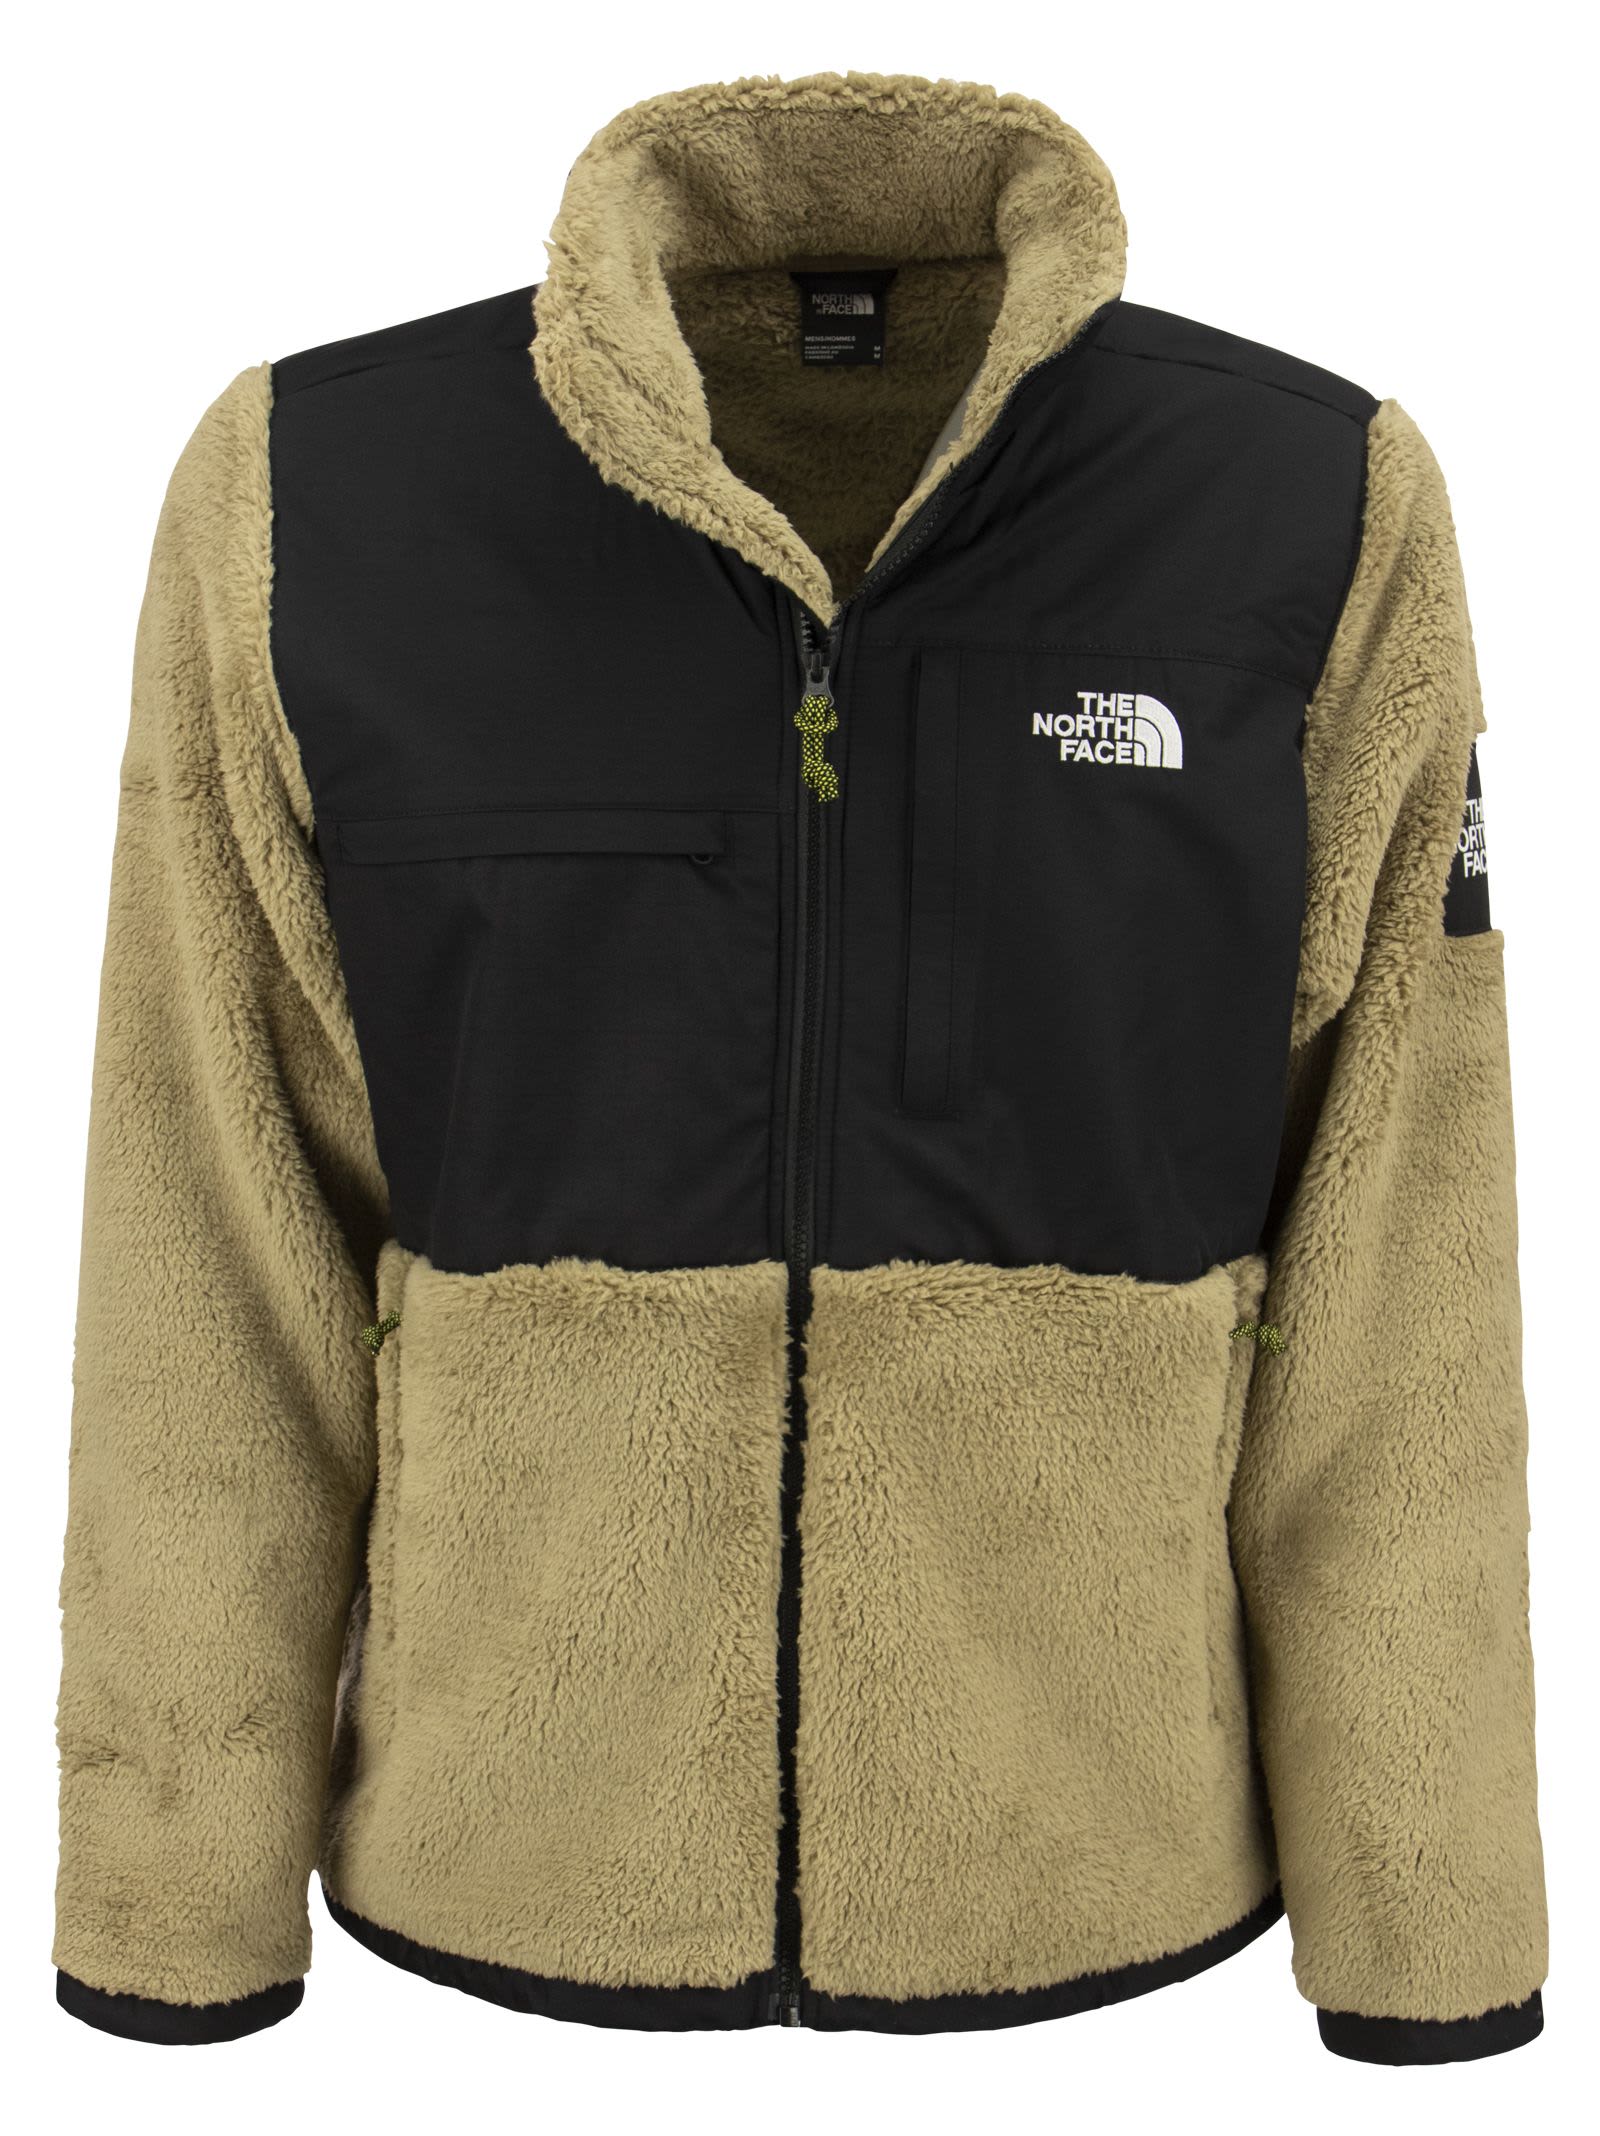 The North Face Sherpa Fleece With Zip